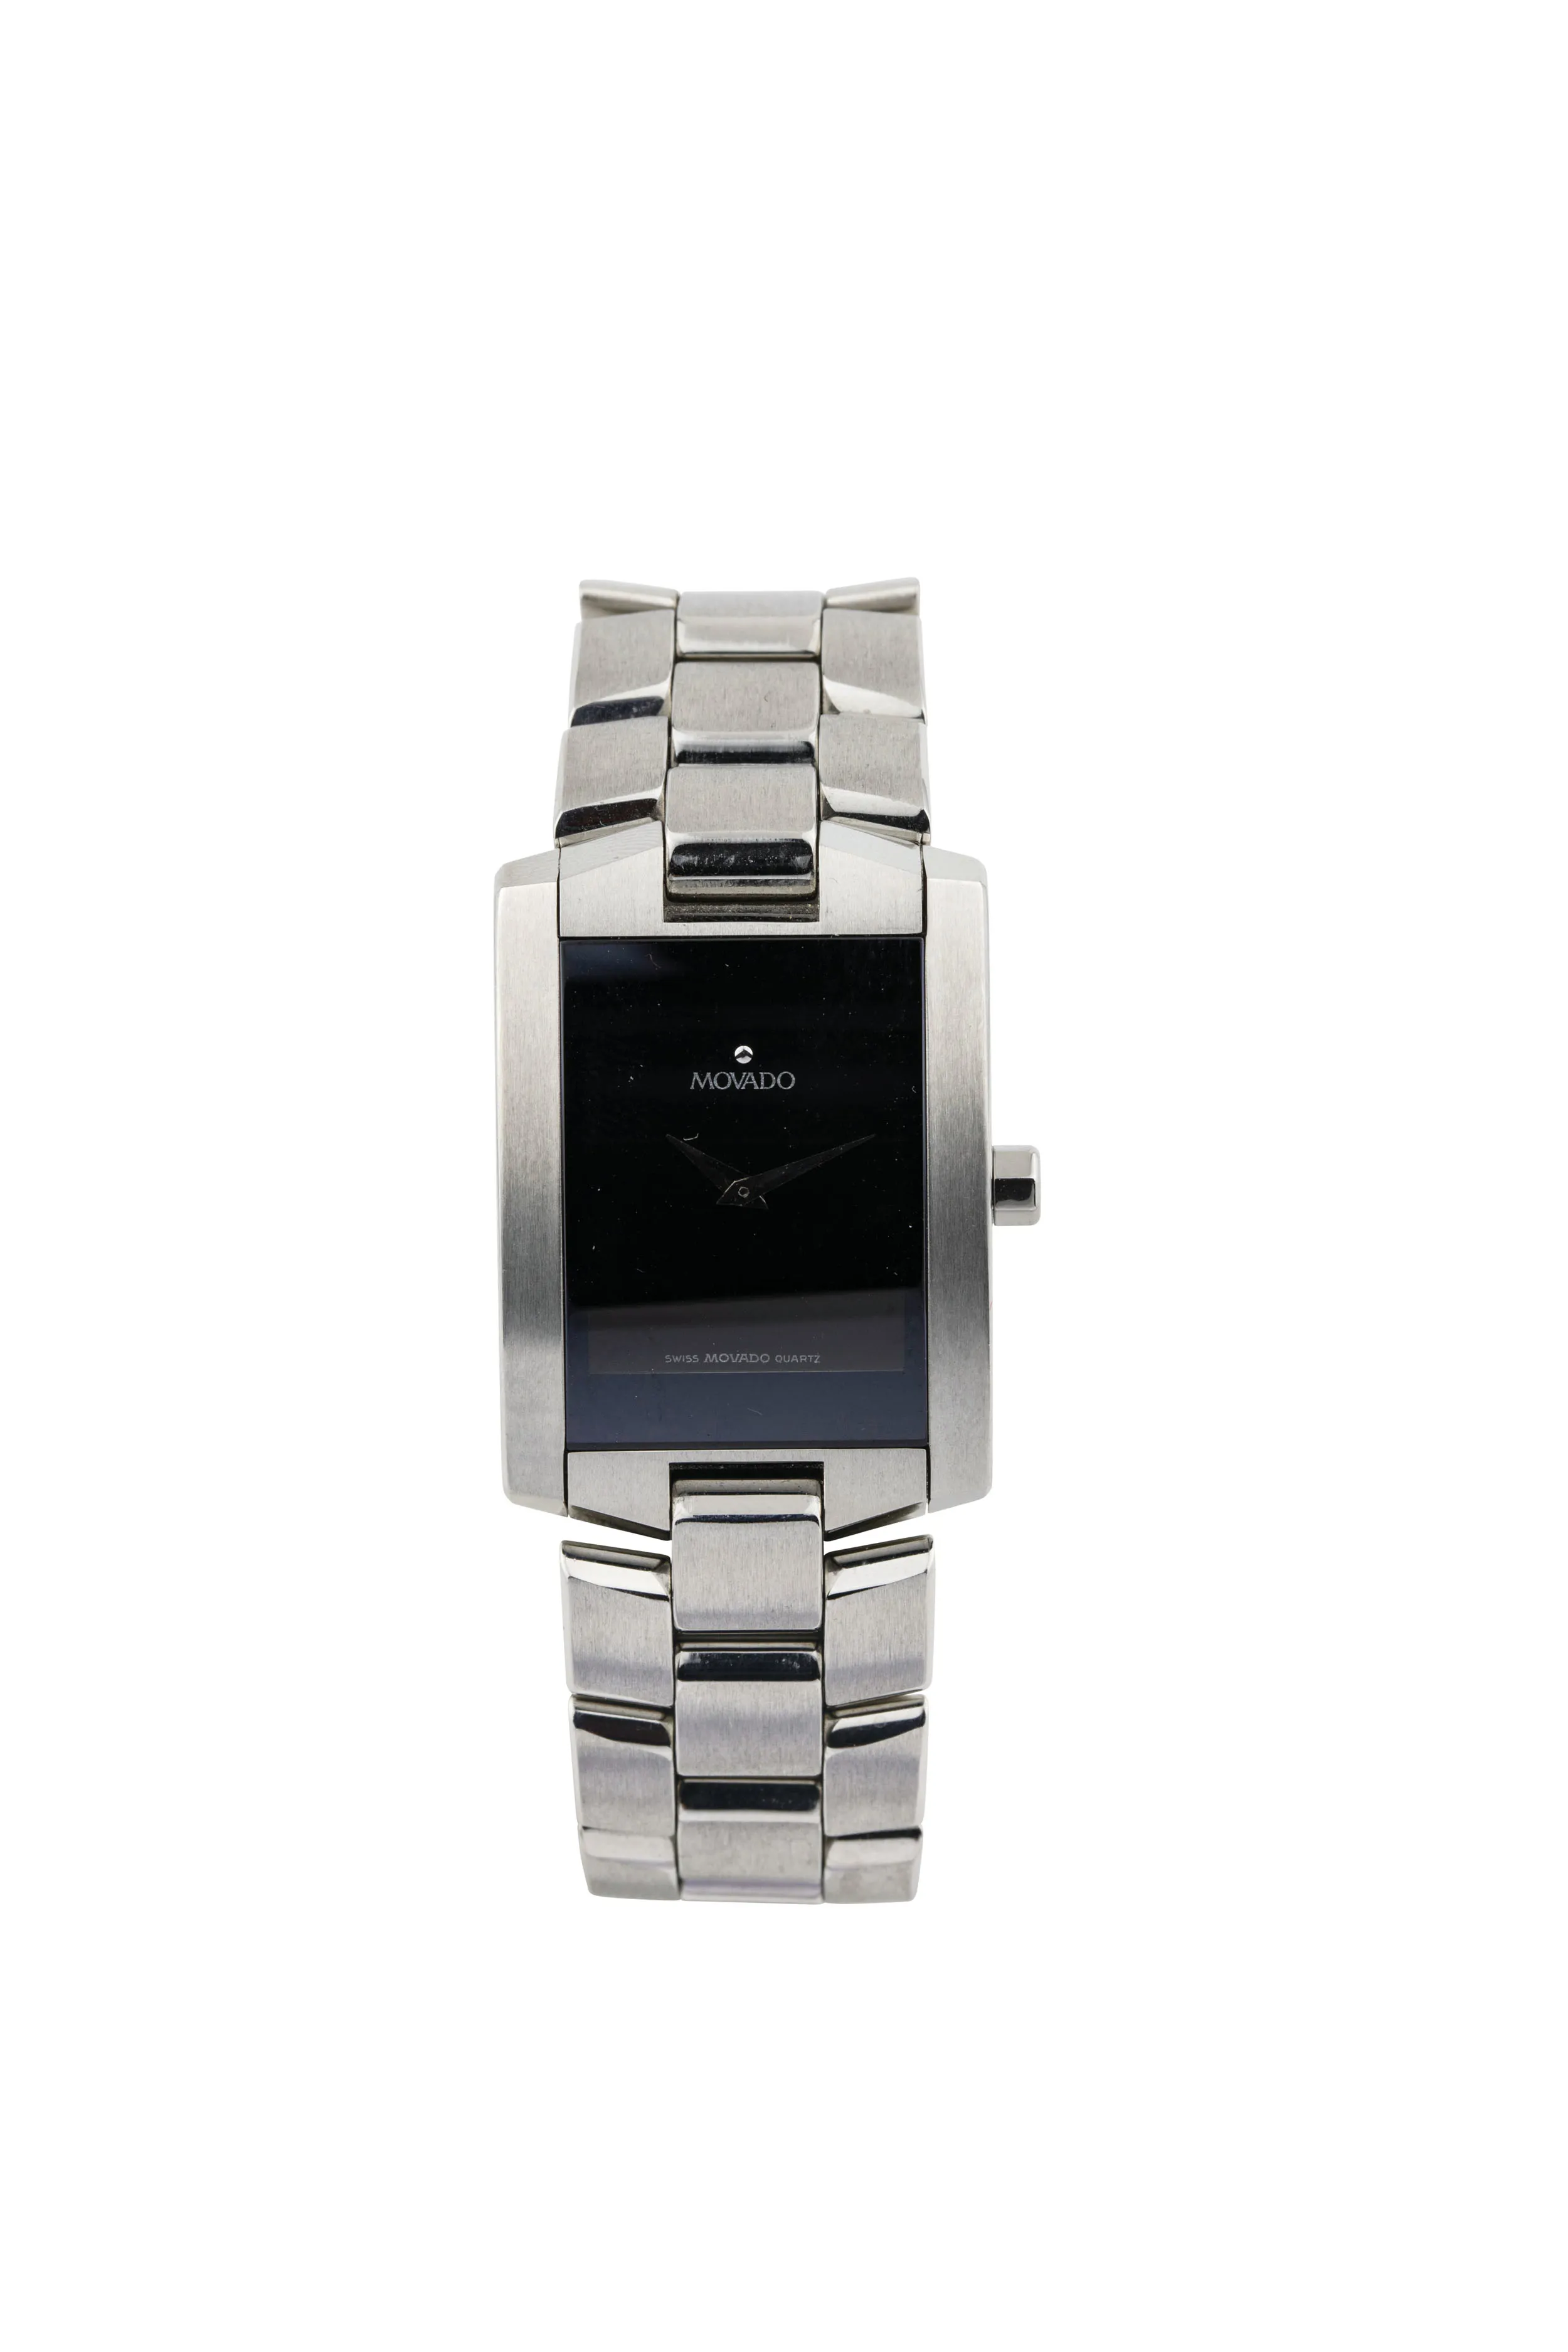 Movado 84-11-455A 24mm Stainless steel